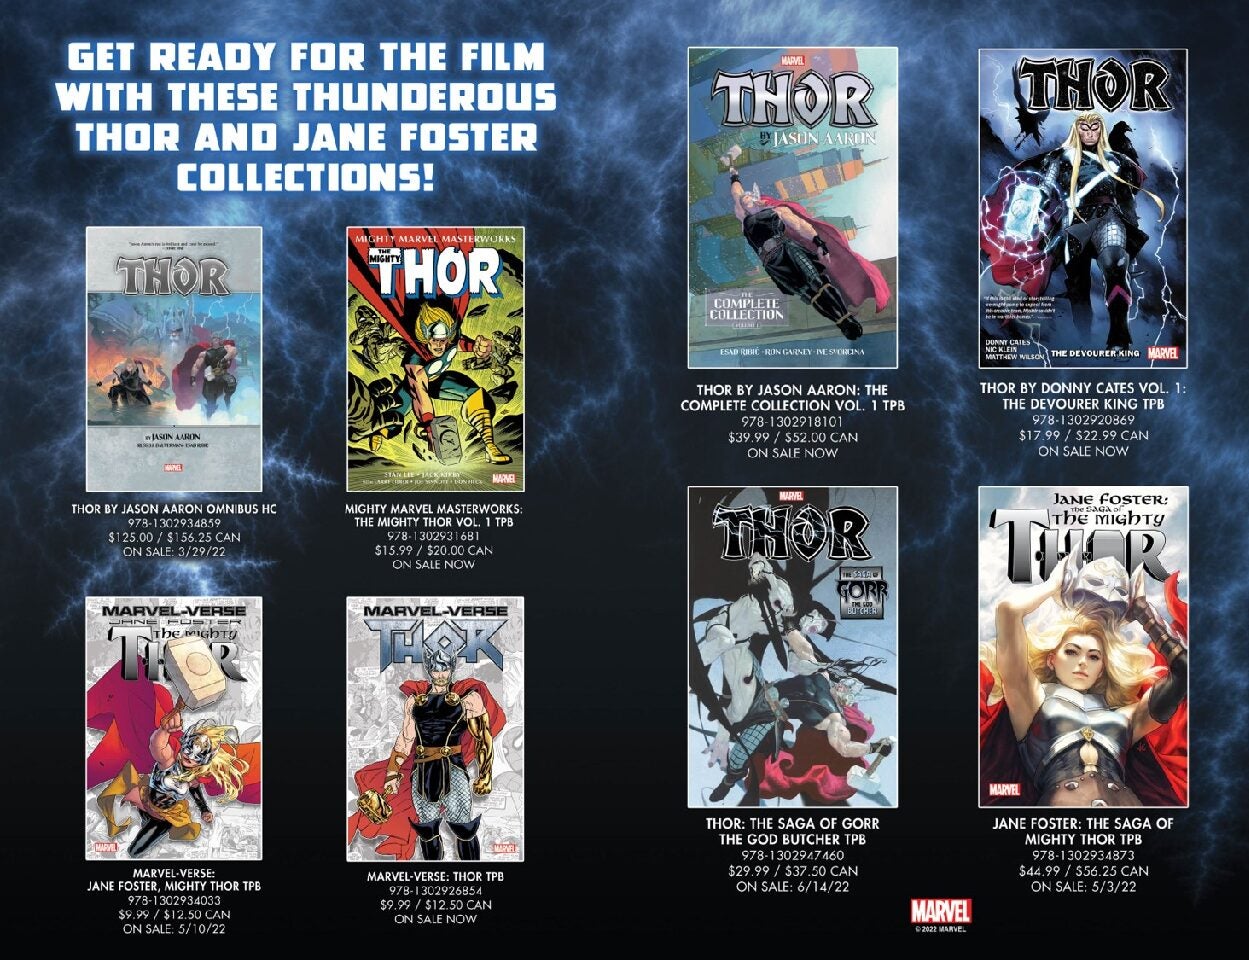 Thor Sell Sheet cover